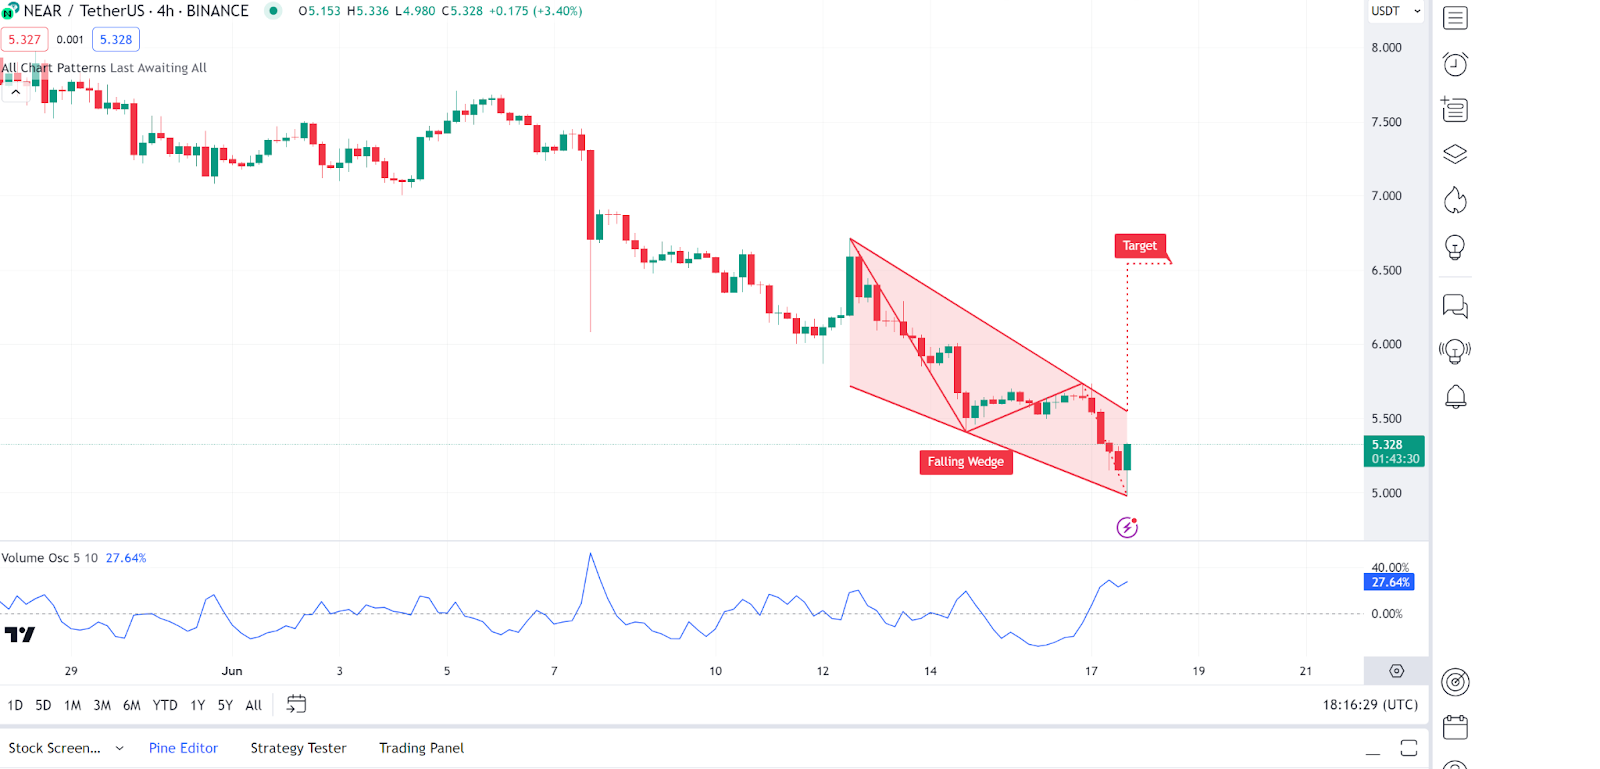 Daily Market Review: BTC, ETH, XRP, SOL, NEAR